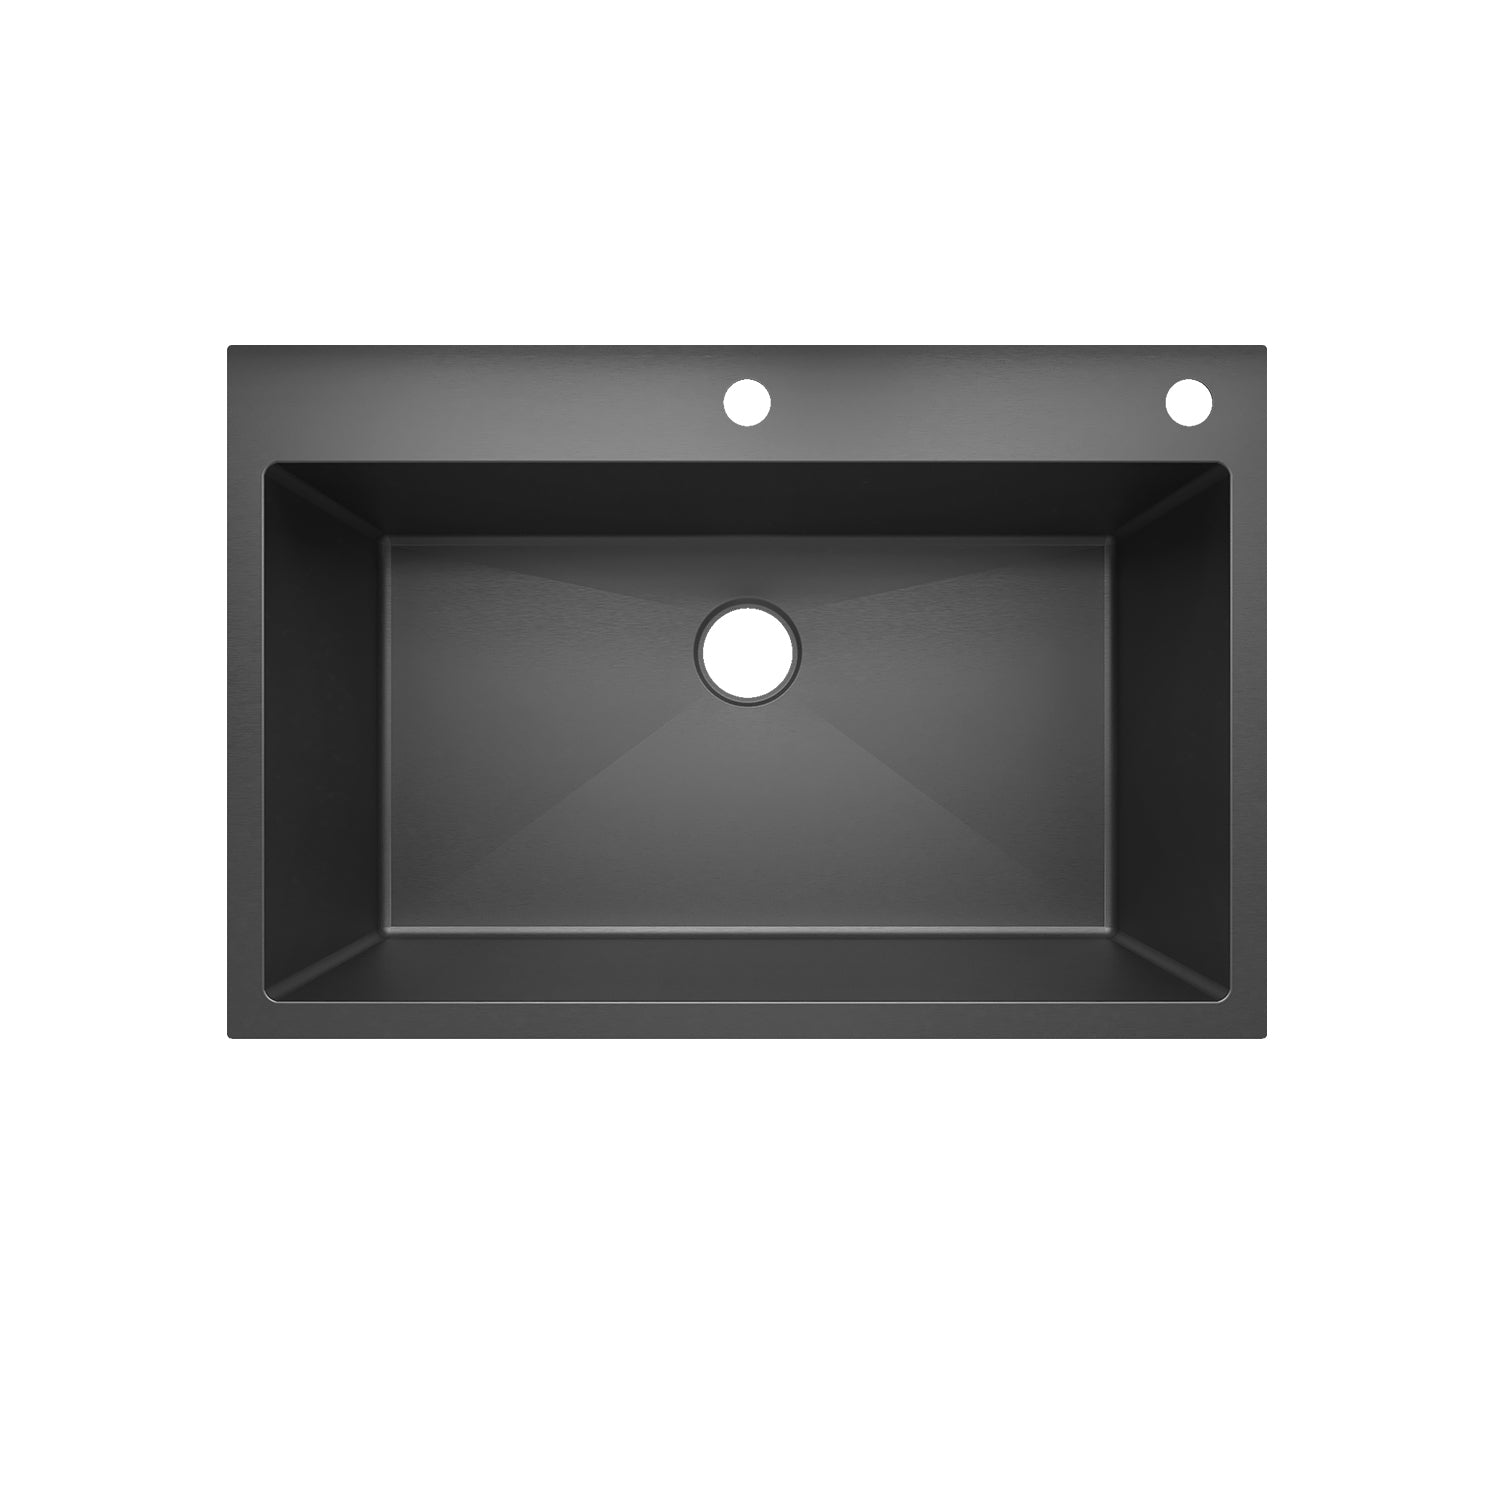 Sinber 33" x 22" x 9" Drop In Single Bowl Kitchen Sink with 18 Gauge 304 Stainless Steel Black Finish HT3322S-B (Sink Only)